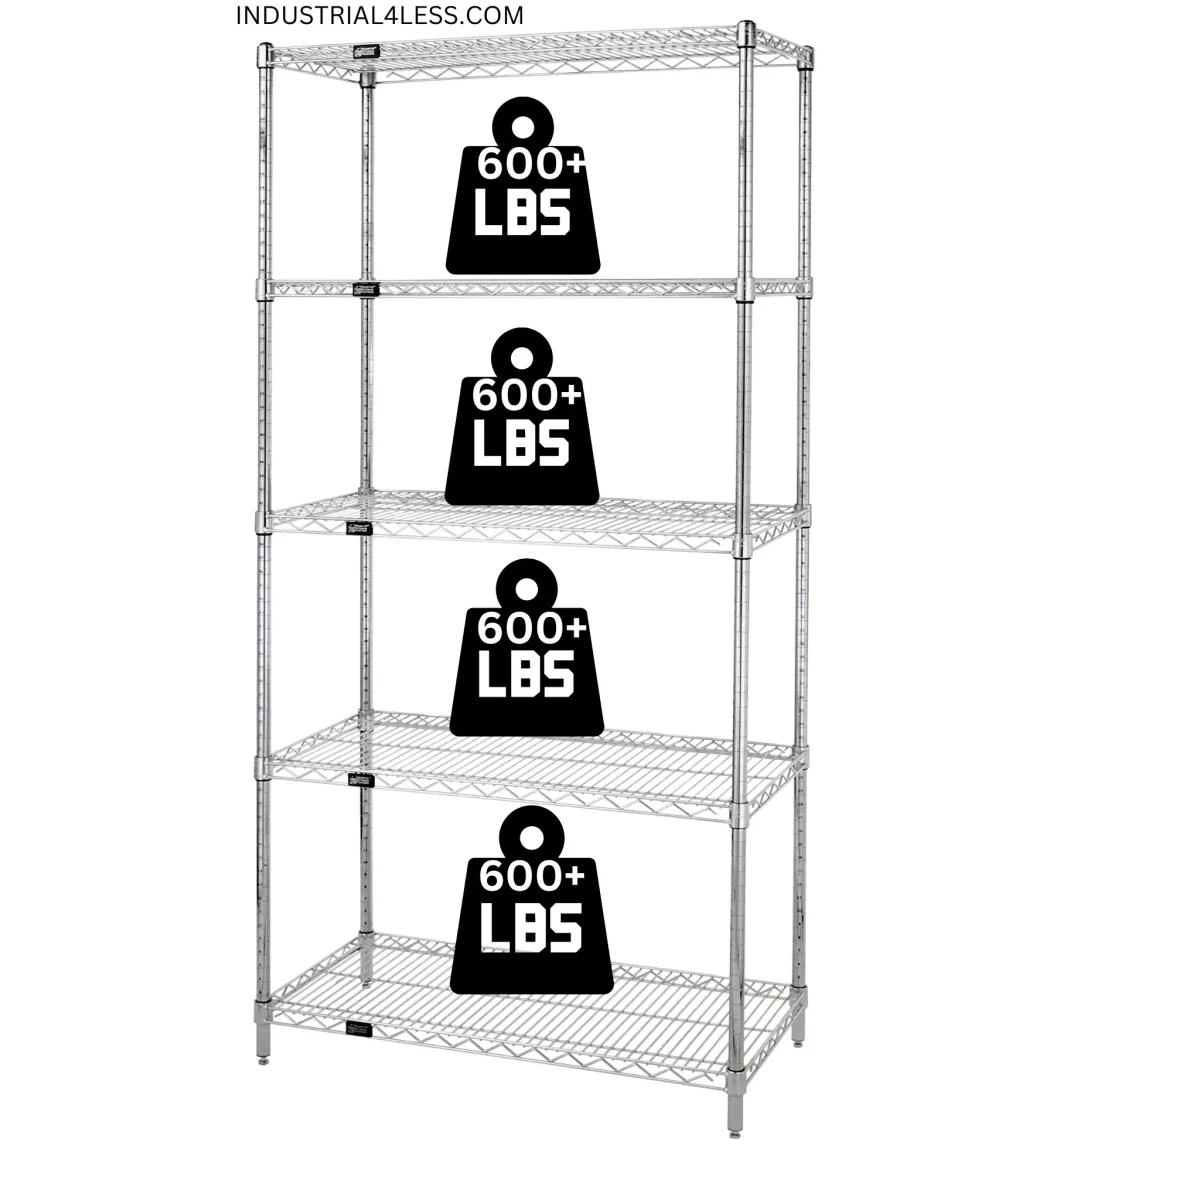 24" x 72" Stainless Steel Wire Shelving Unit - Industrial 4 Less - 24725S-5